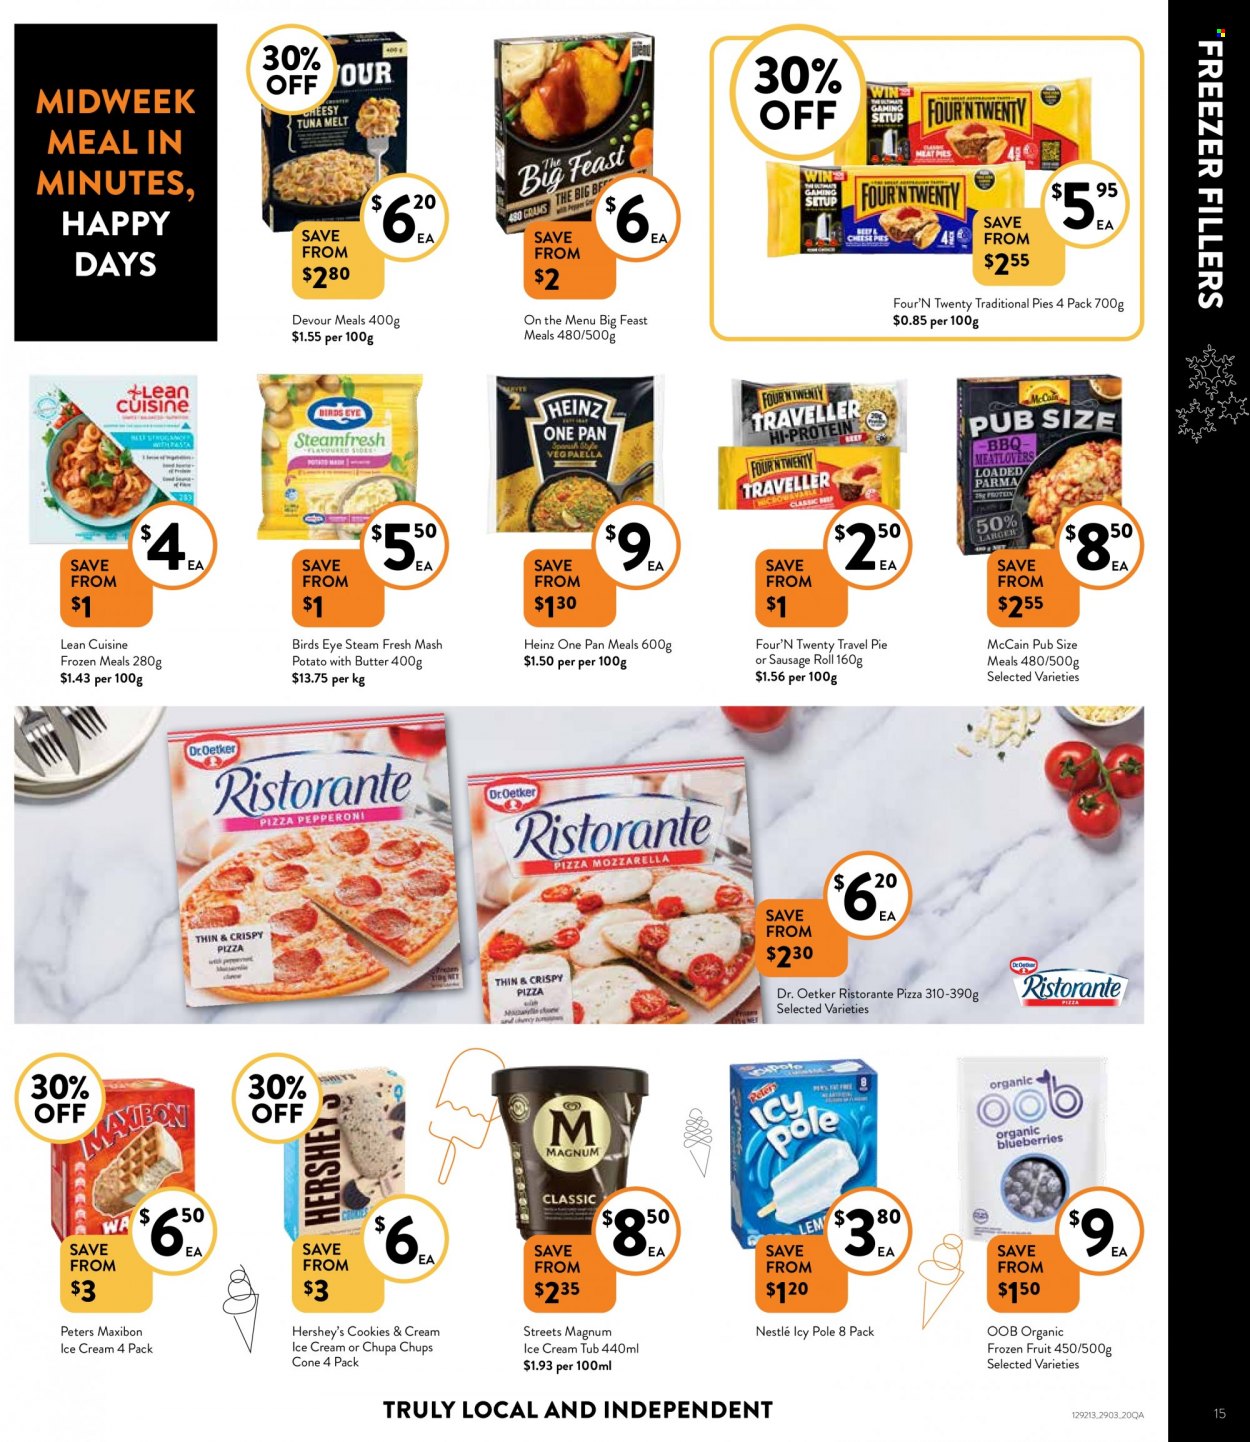 thumbnail - Foodworks Catalogue - 29 Mar 2023 - 4 Apr 2023 - Sales products - sausage rolls, pie, blueberries, tuna, pizza, Bird's Eye, Lean Cuisine, sausage, pepperoni, Dr. Oetker, Magnum, ice cream, Hershey's, organic frozen fruit, Devour, McCain, cookies, Nestlé, Heinz, wine, TRULY, pan. Page 15.